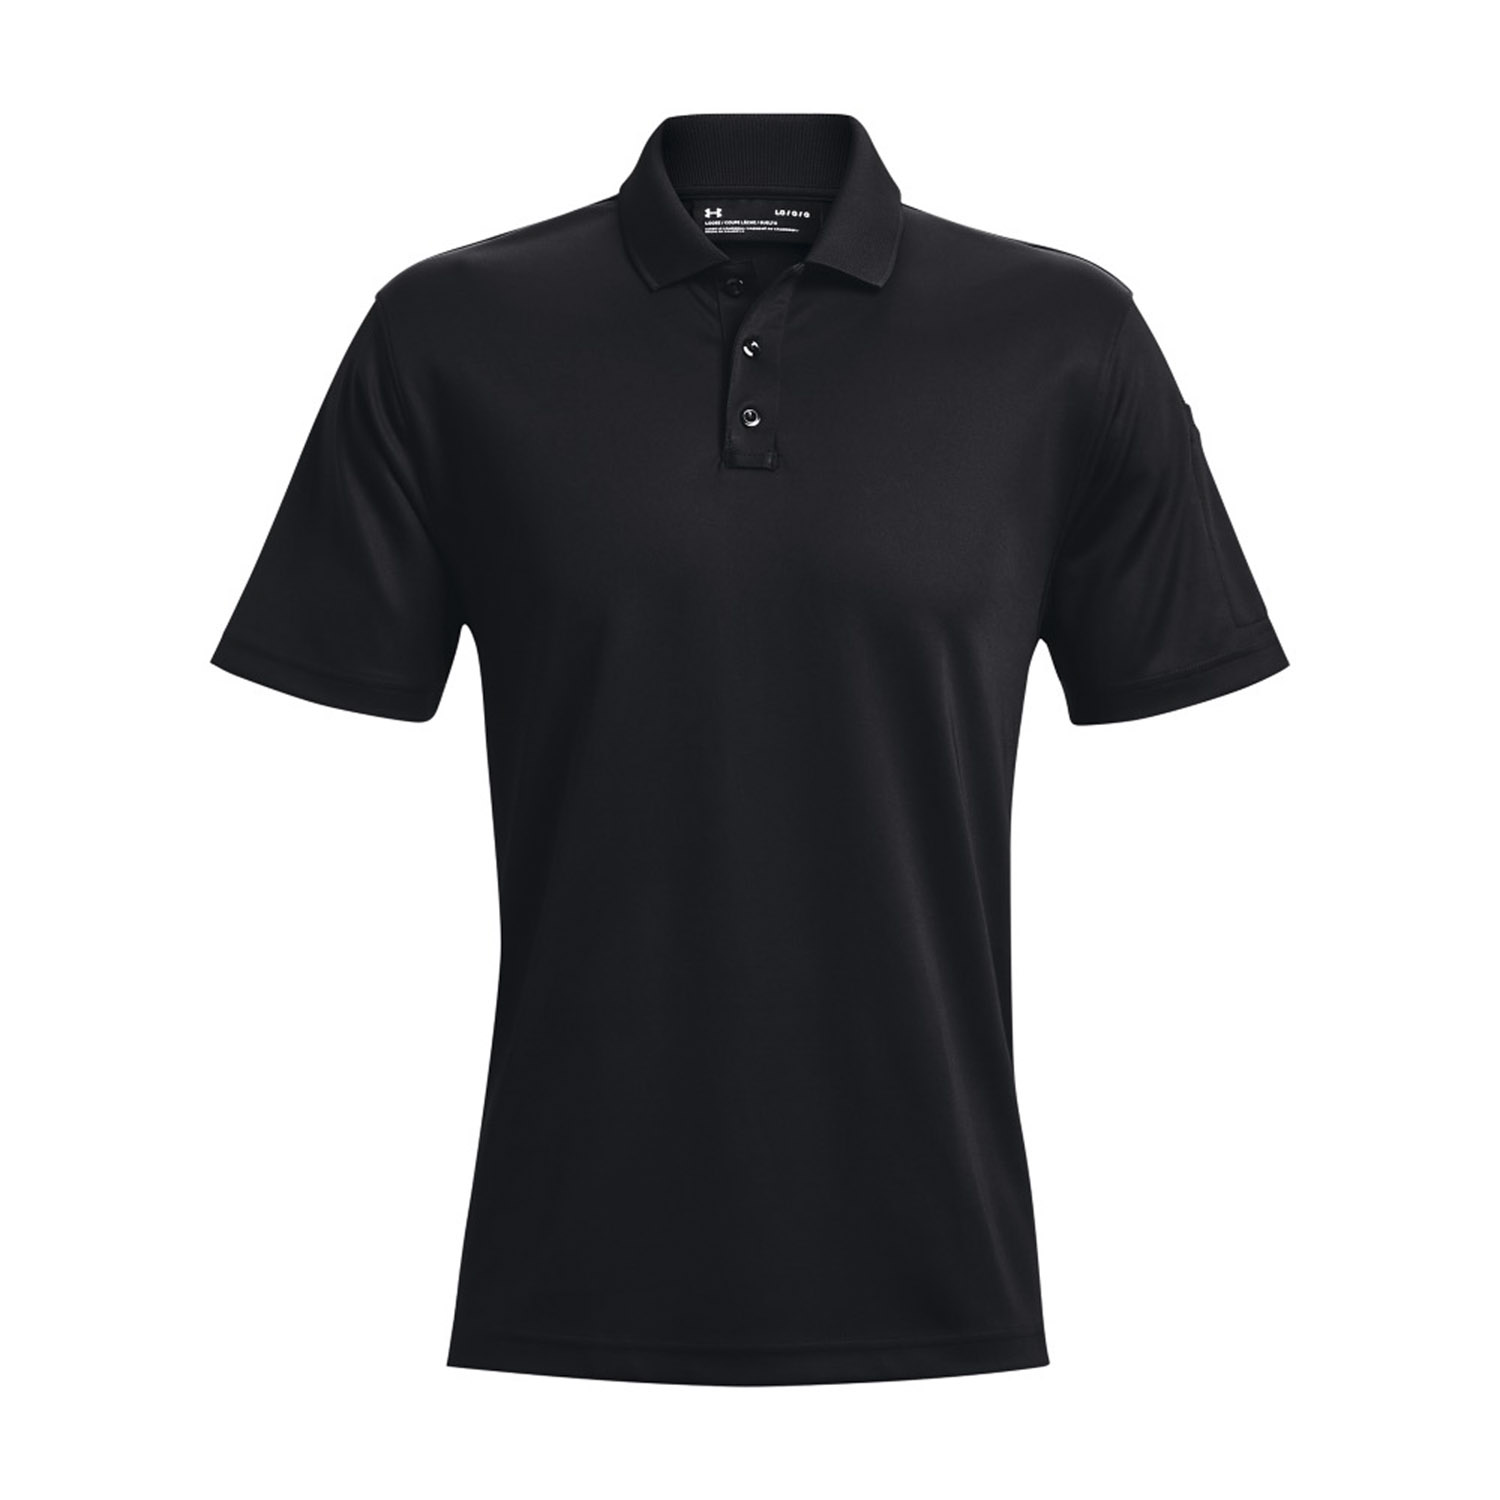 UNDER ARMOUR TAC SHORT-SLEEVED PERFORMANCE POLO 2.0